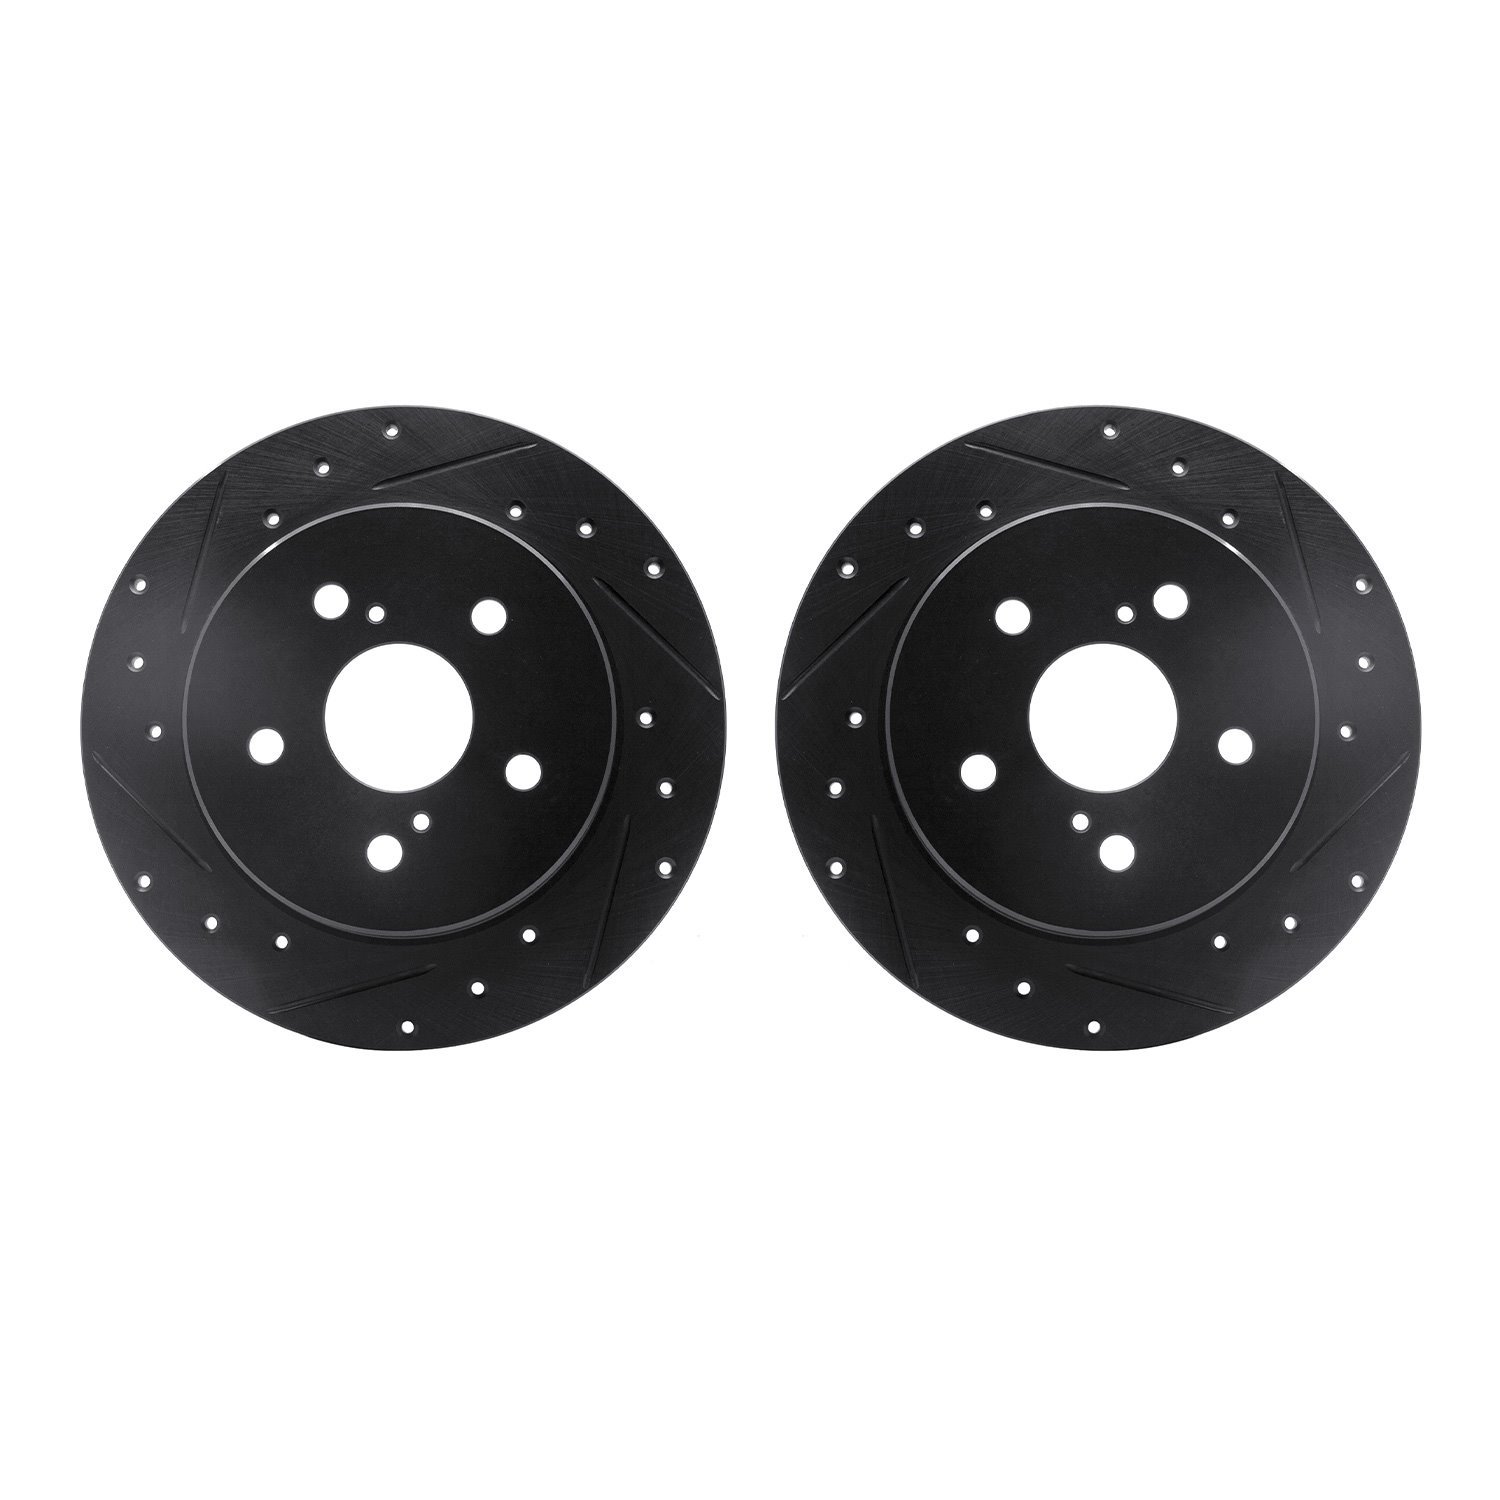 8002-75021 Drilled/Slotted Brake Rotors [Black], Fits Select Lexus/Toyota/Scion, Position: Rear